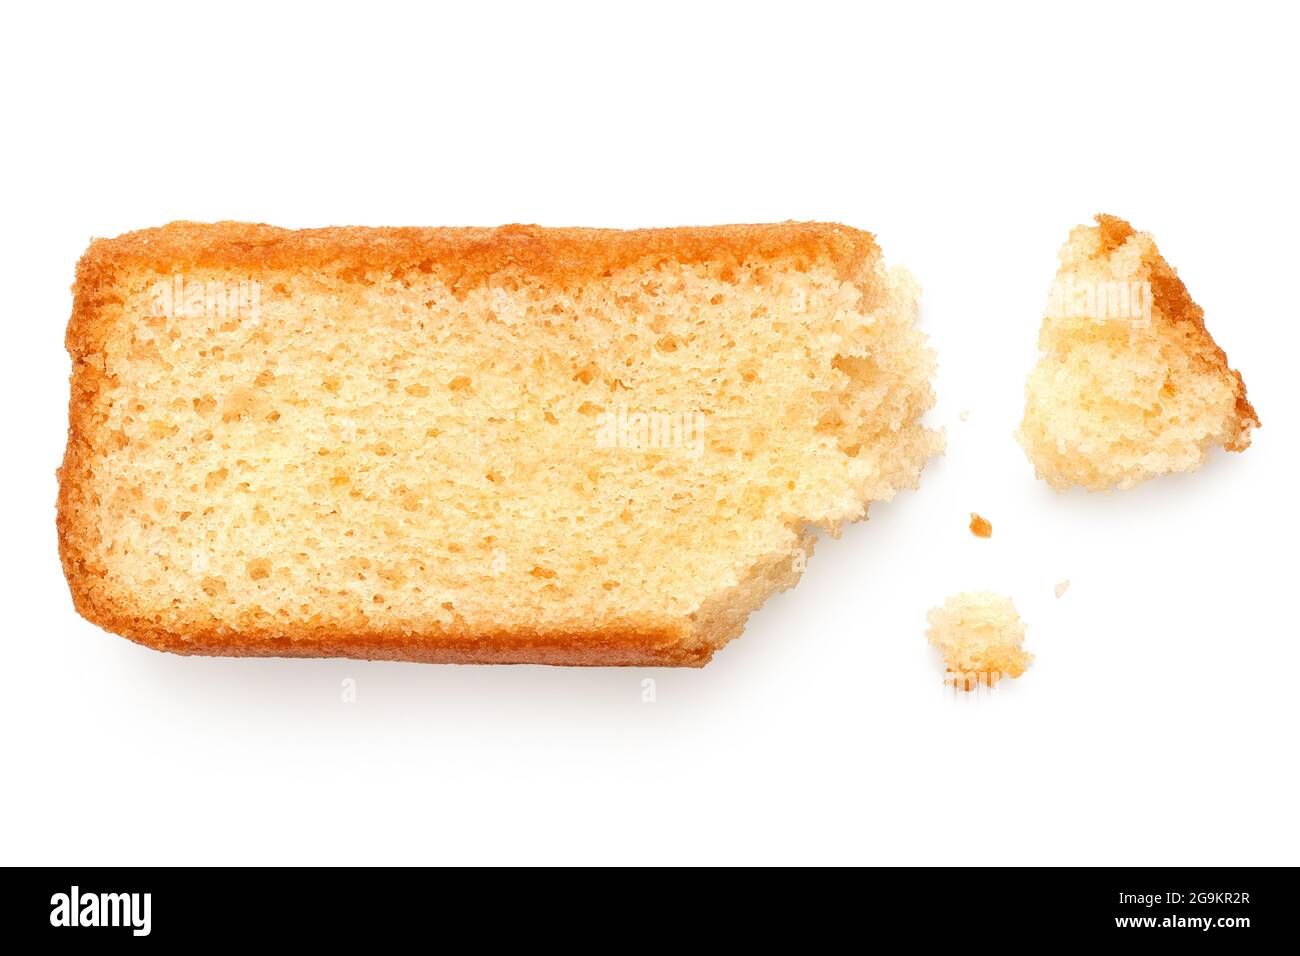 Partially eaten slice of plain sponge cake lying flat isolated on white. With crumbs. Top view. Stock Photo